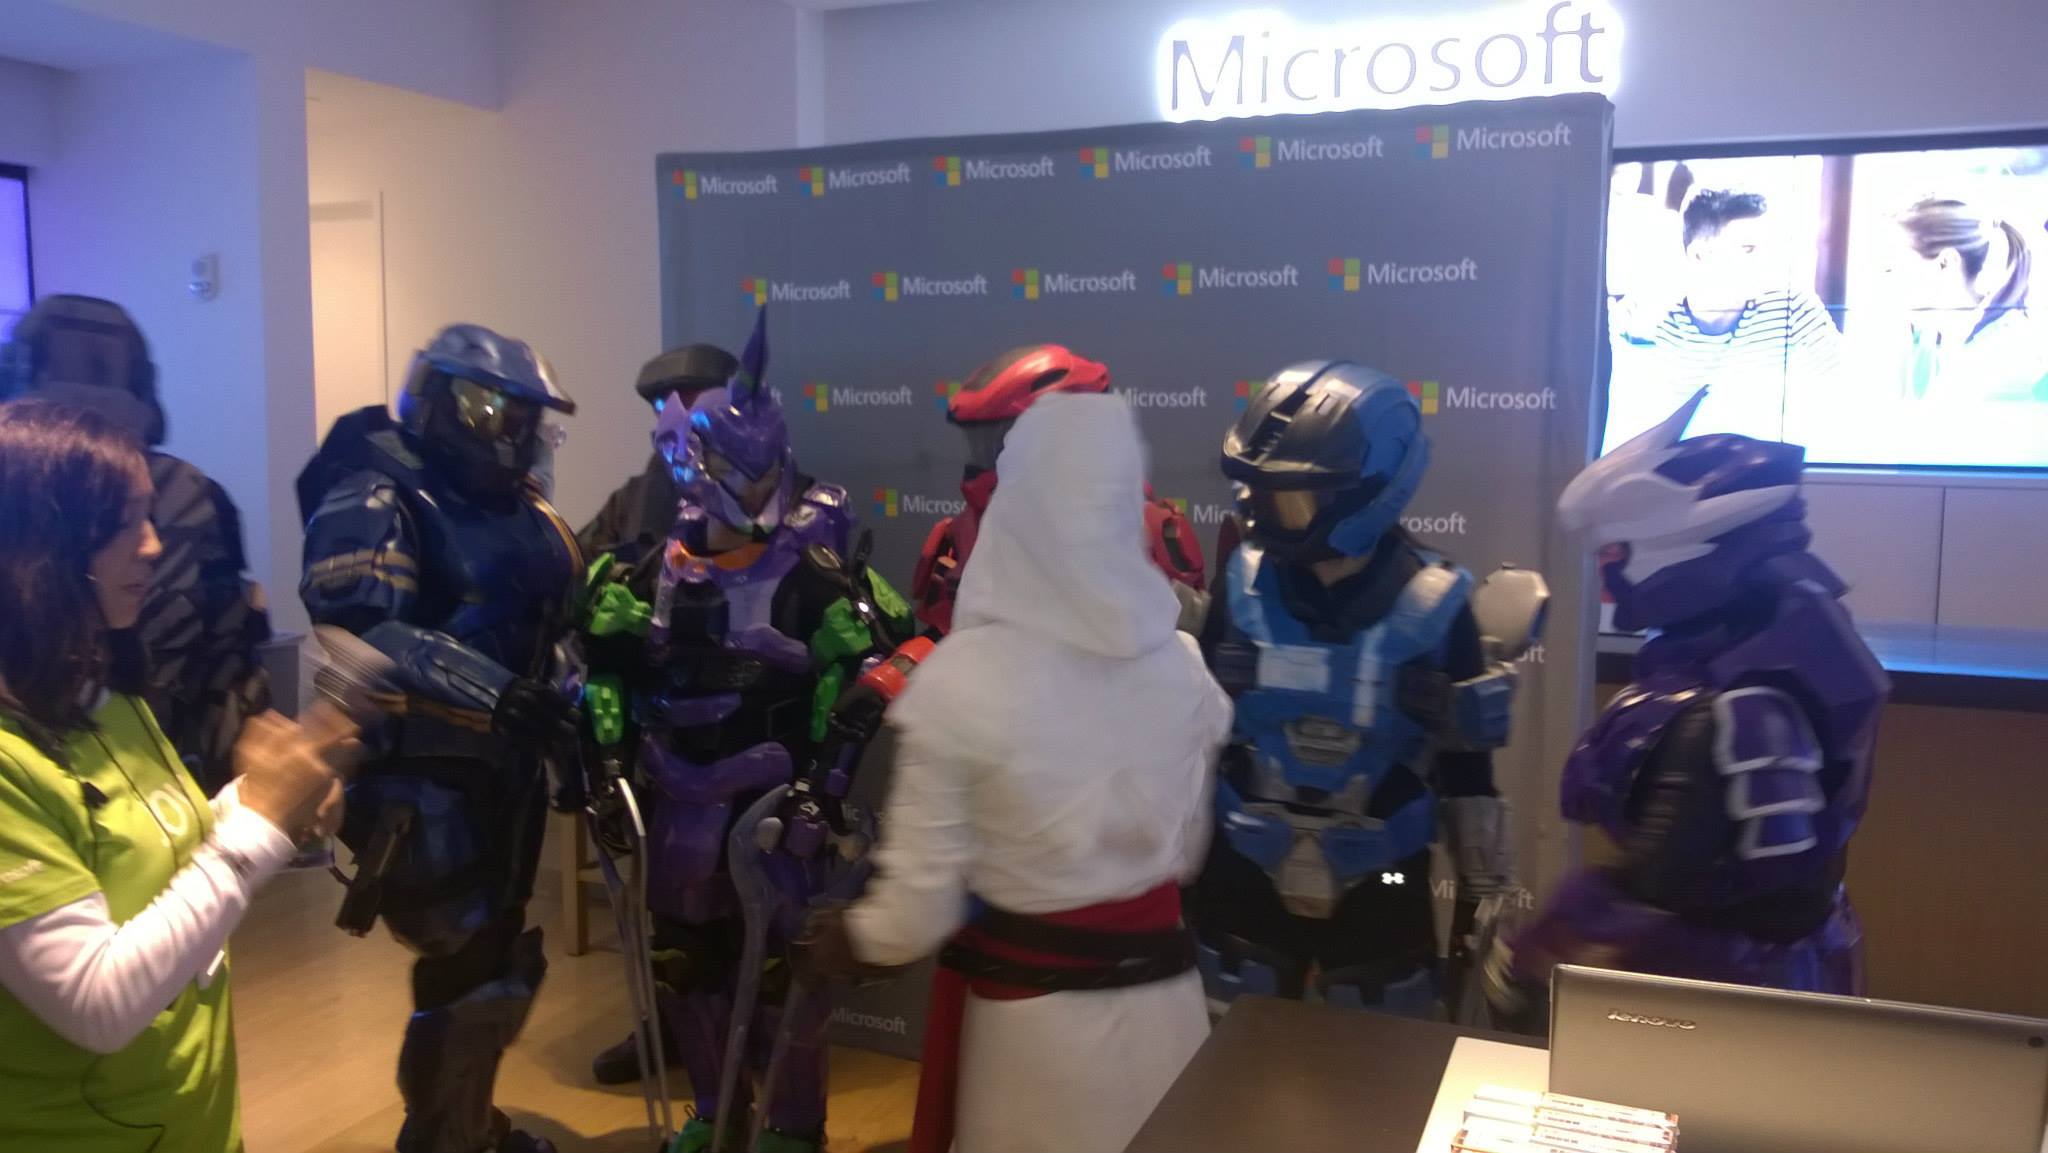 Halo Master Chief Collection release day and Assassin's Creed Unity release at Microsoft Store.